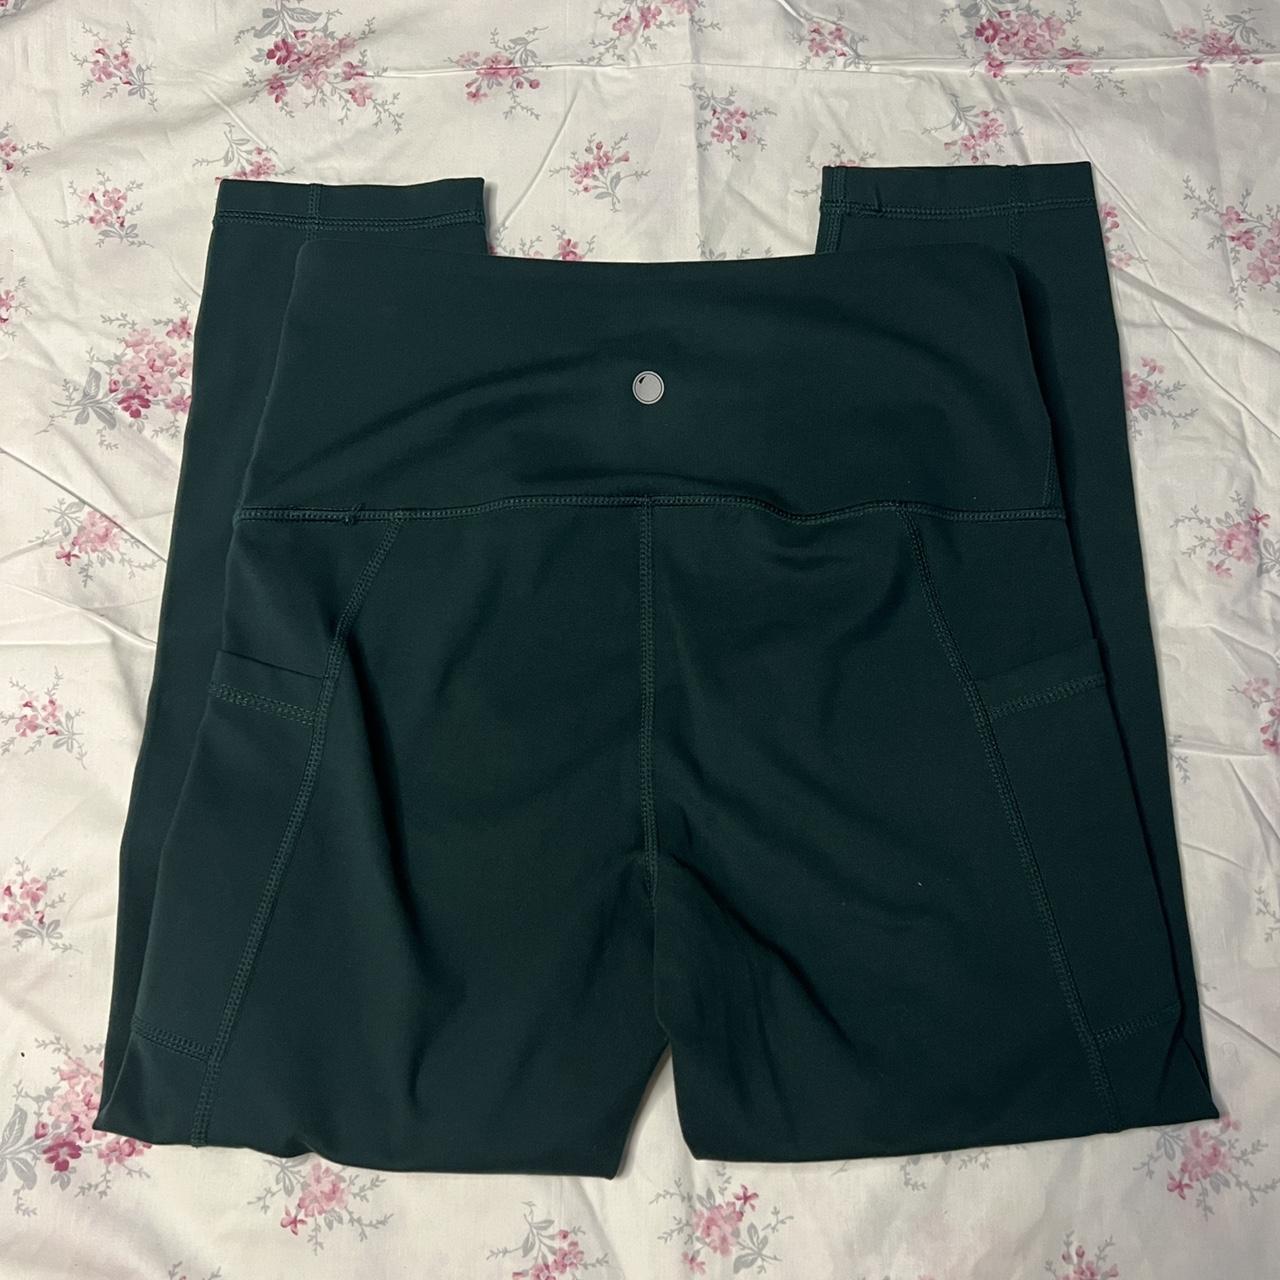 yogalicious green leggings -size small -only used 2 - Depop